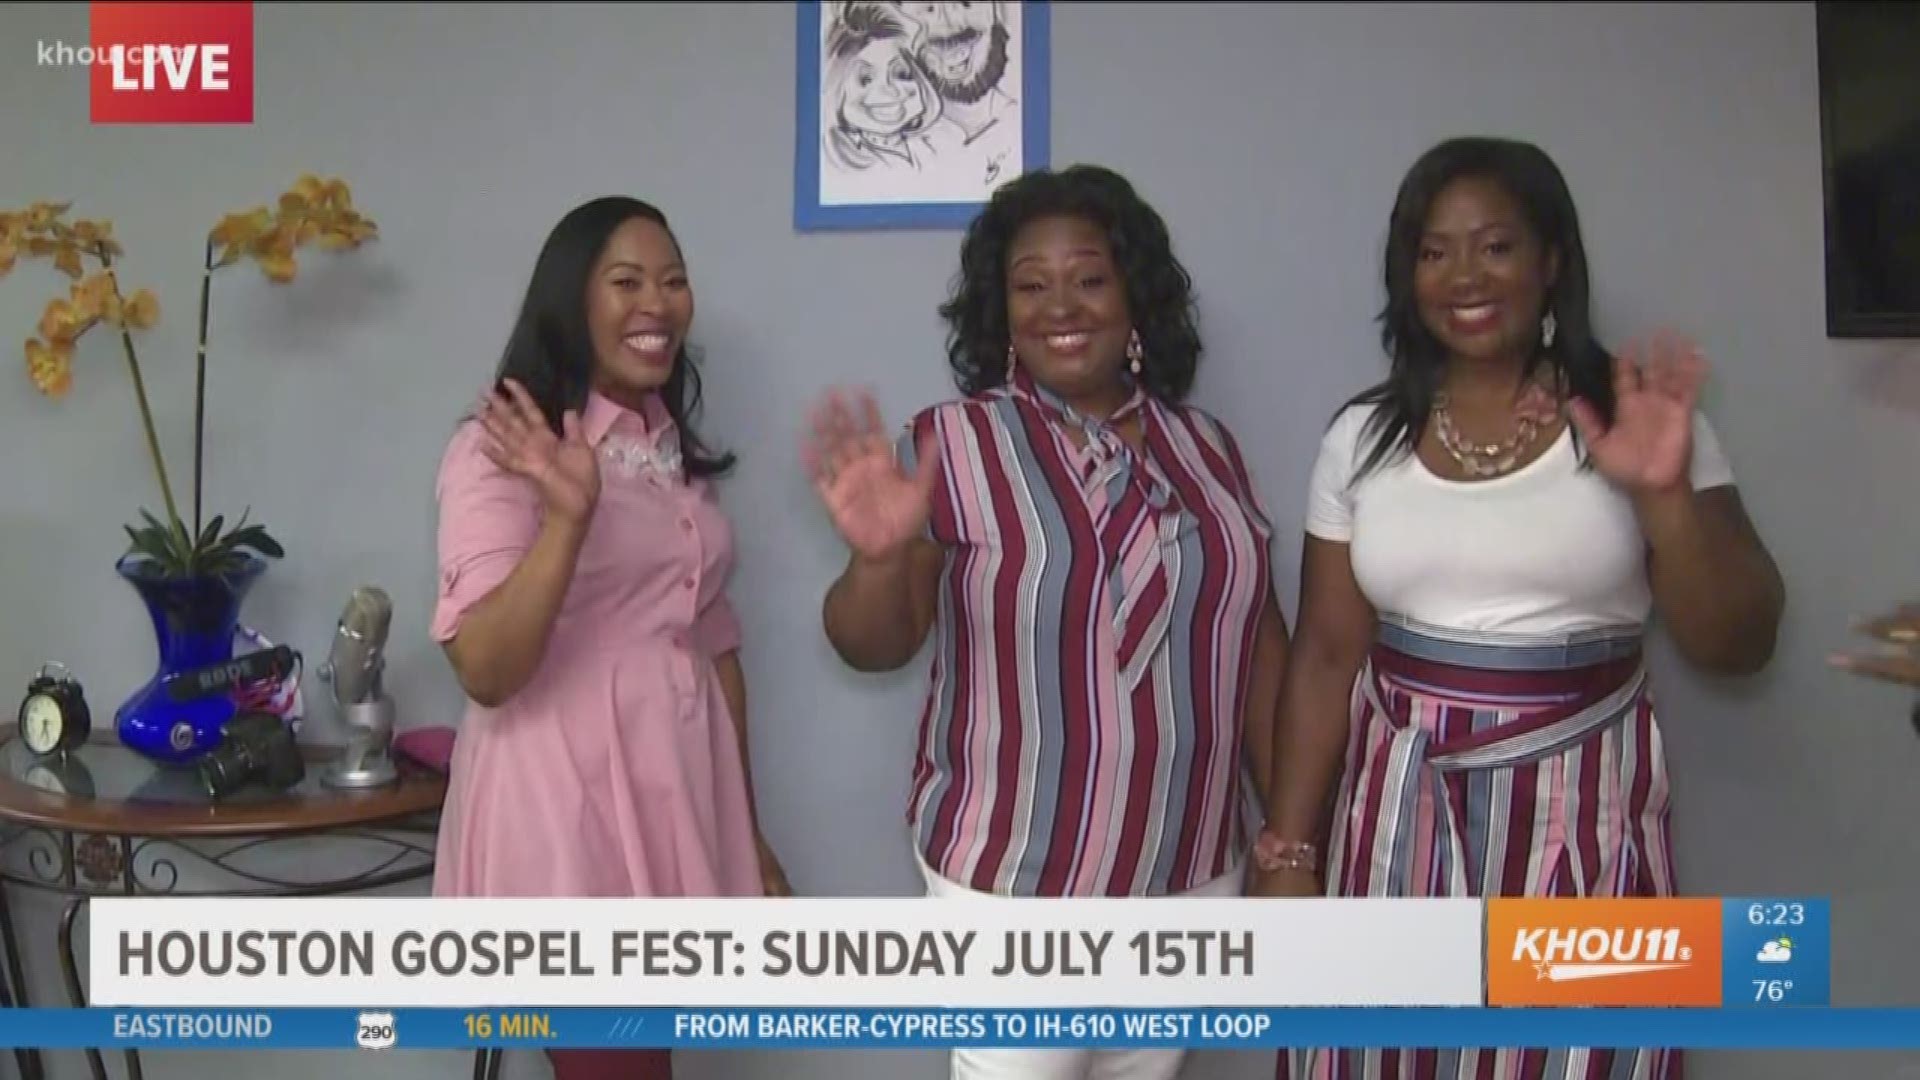 A huge gospel festival is coming to the Bayou City next week. KHOU 11 reporter Sherry Williams is live with the details. 